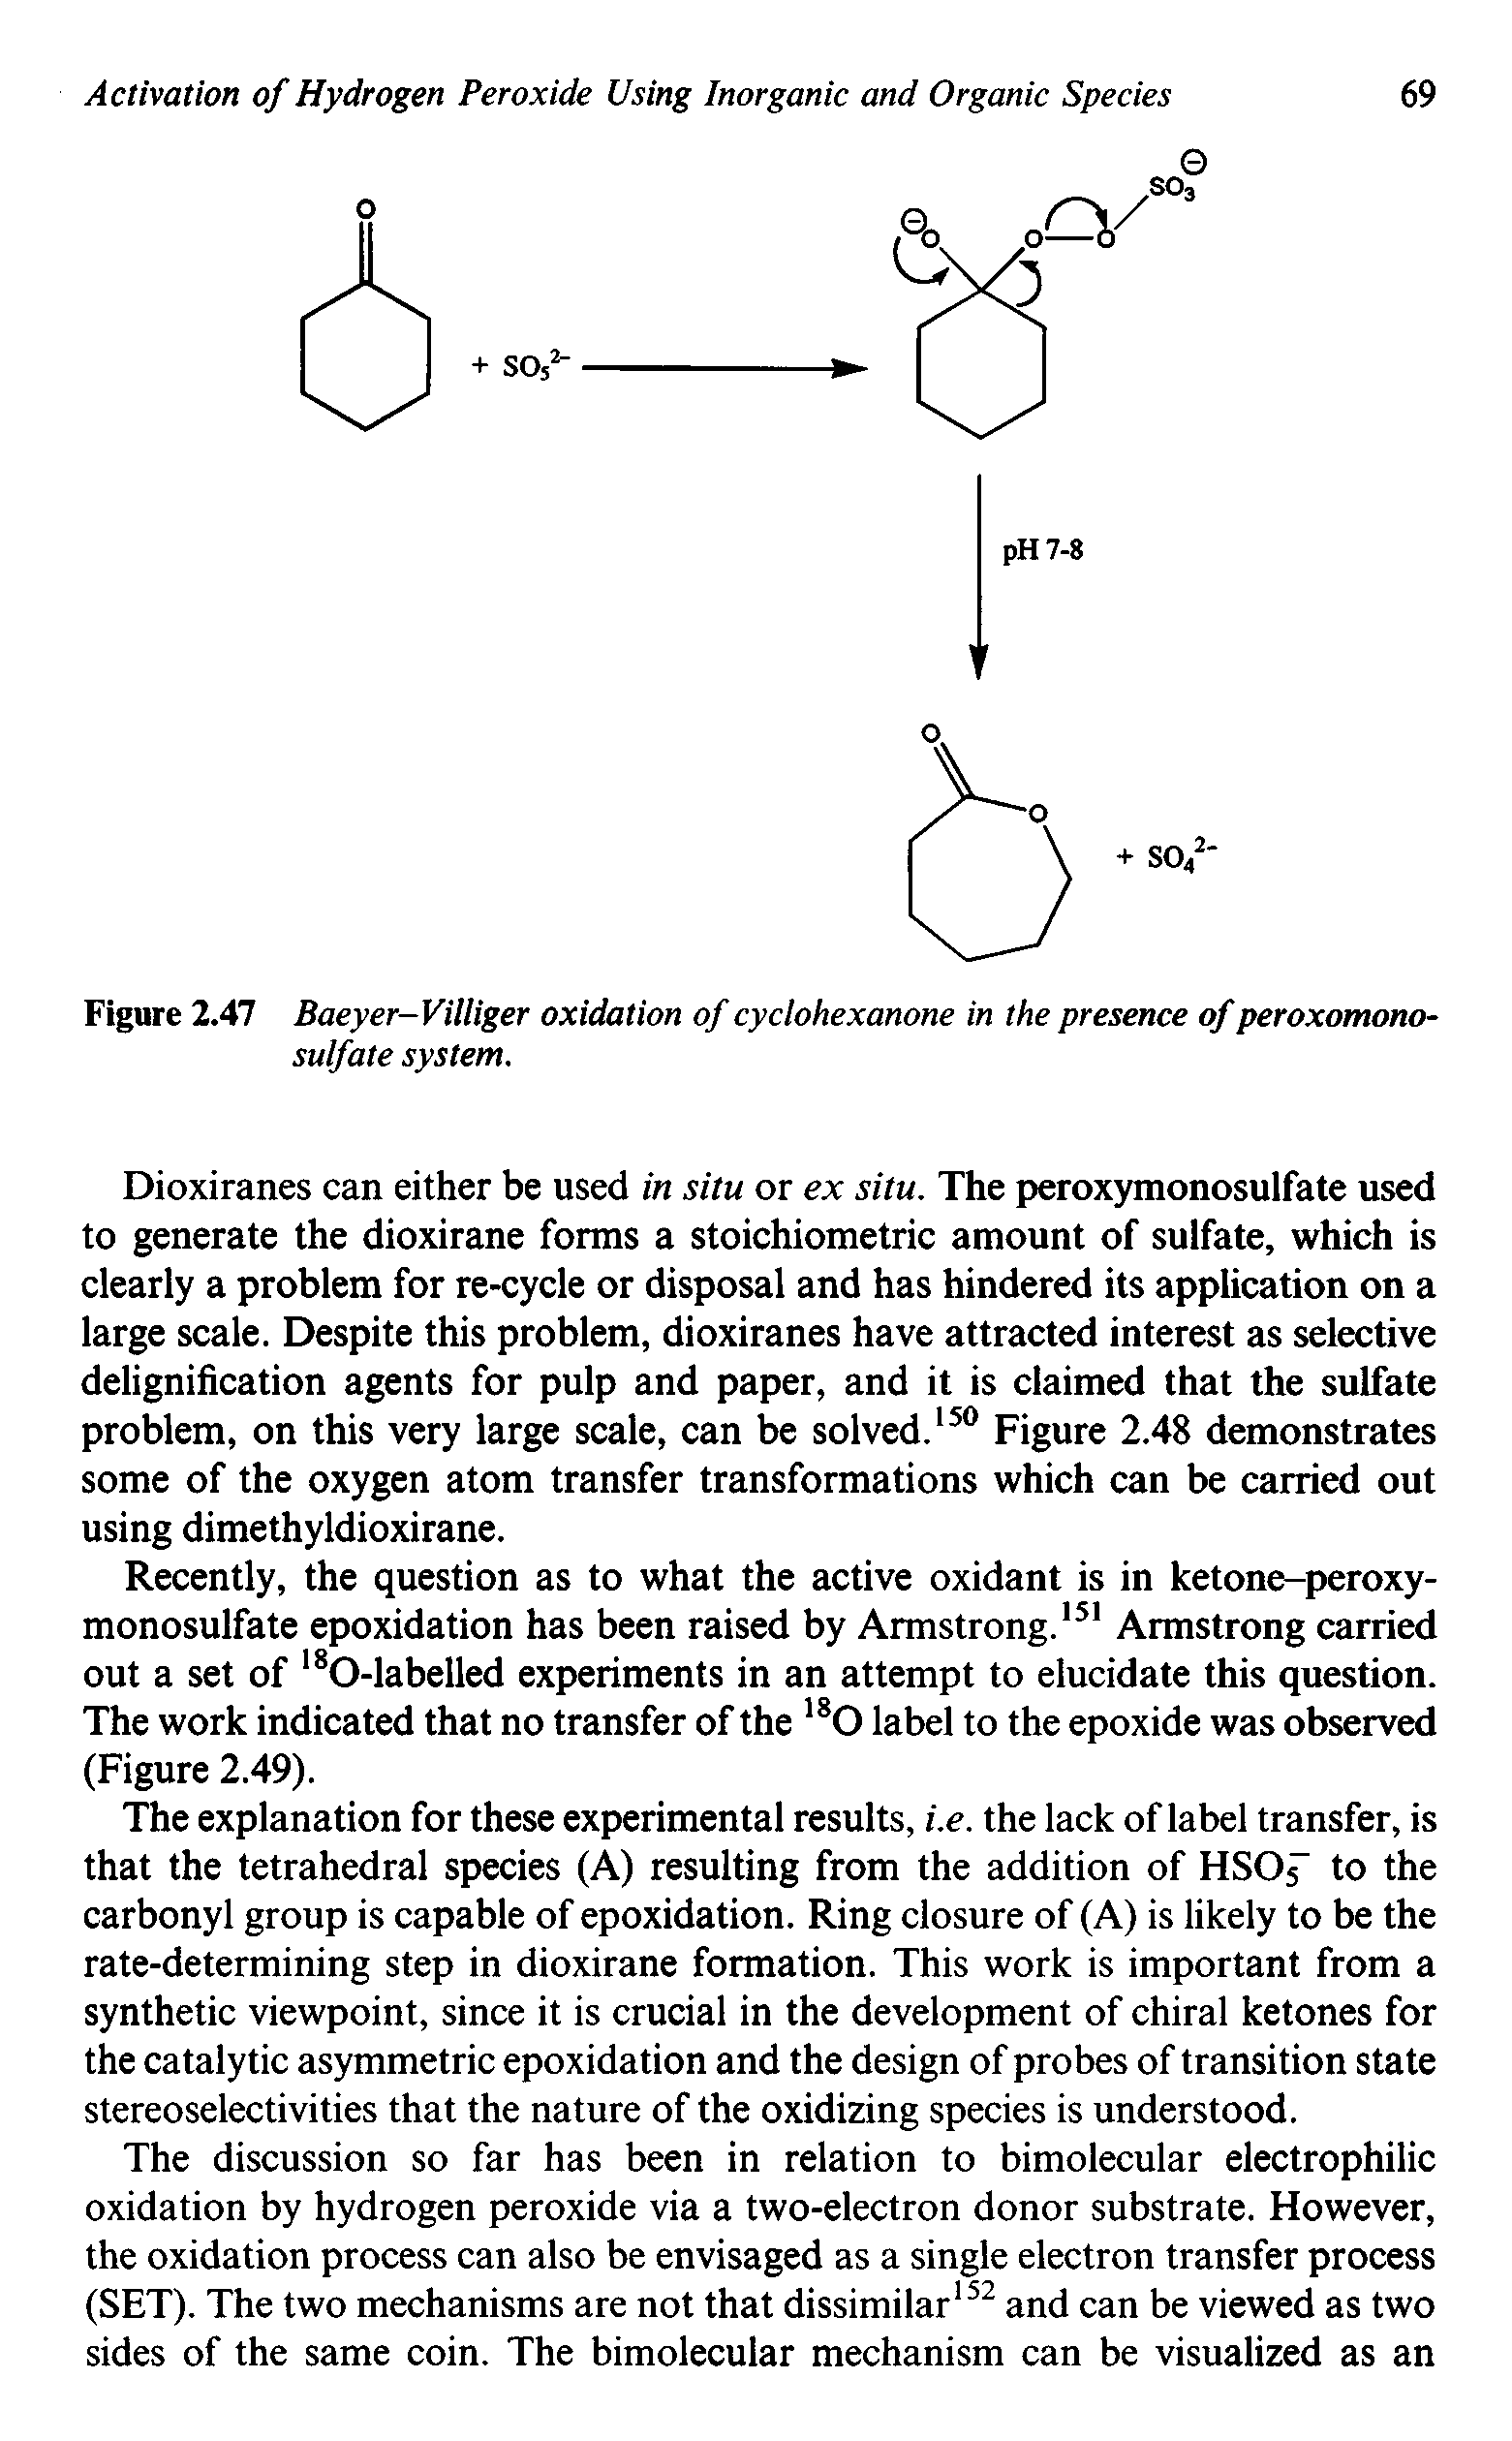 Figure 2.47 Baeyer-Villiger oxidation of cyclohexanone in the presence of peroxomono-sulfate system.